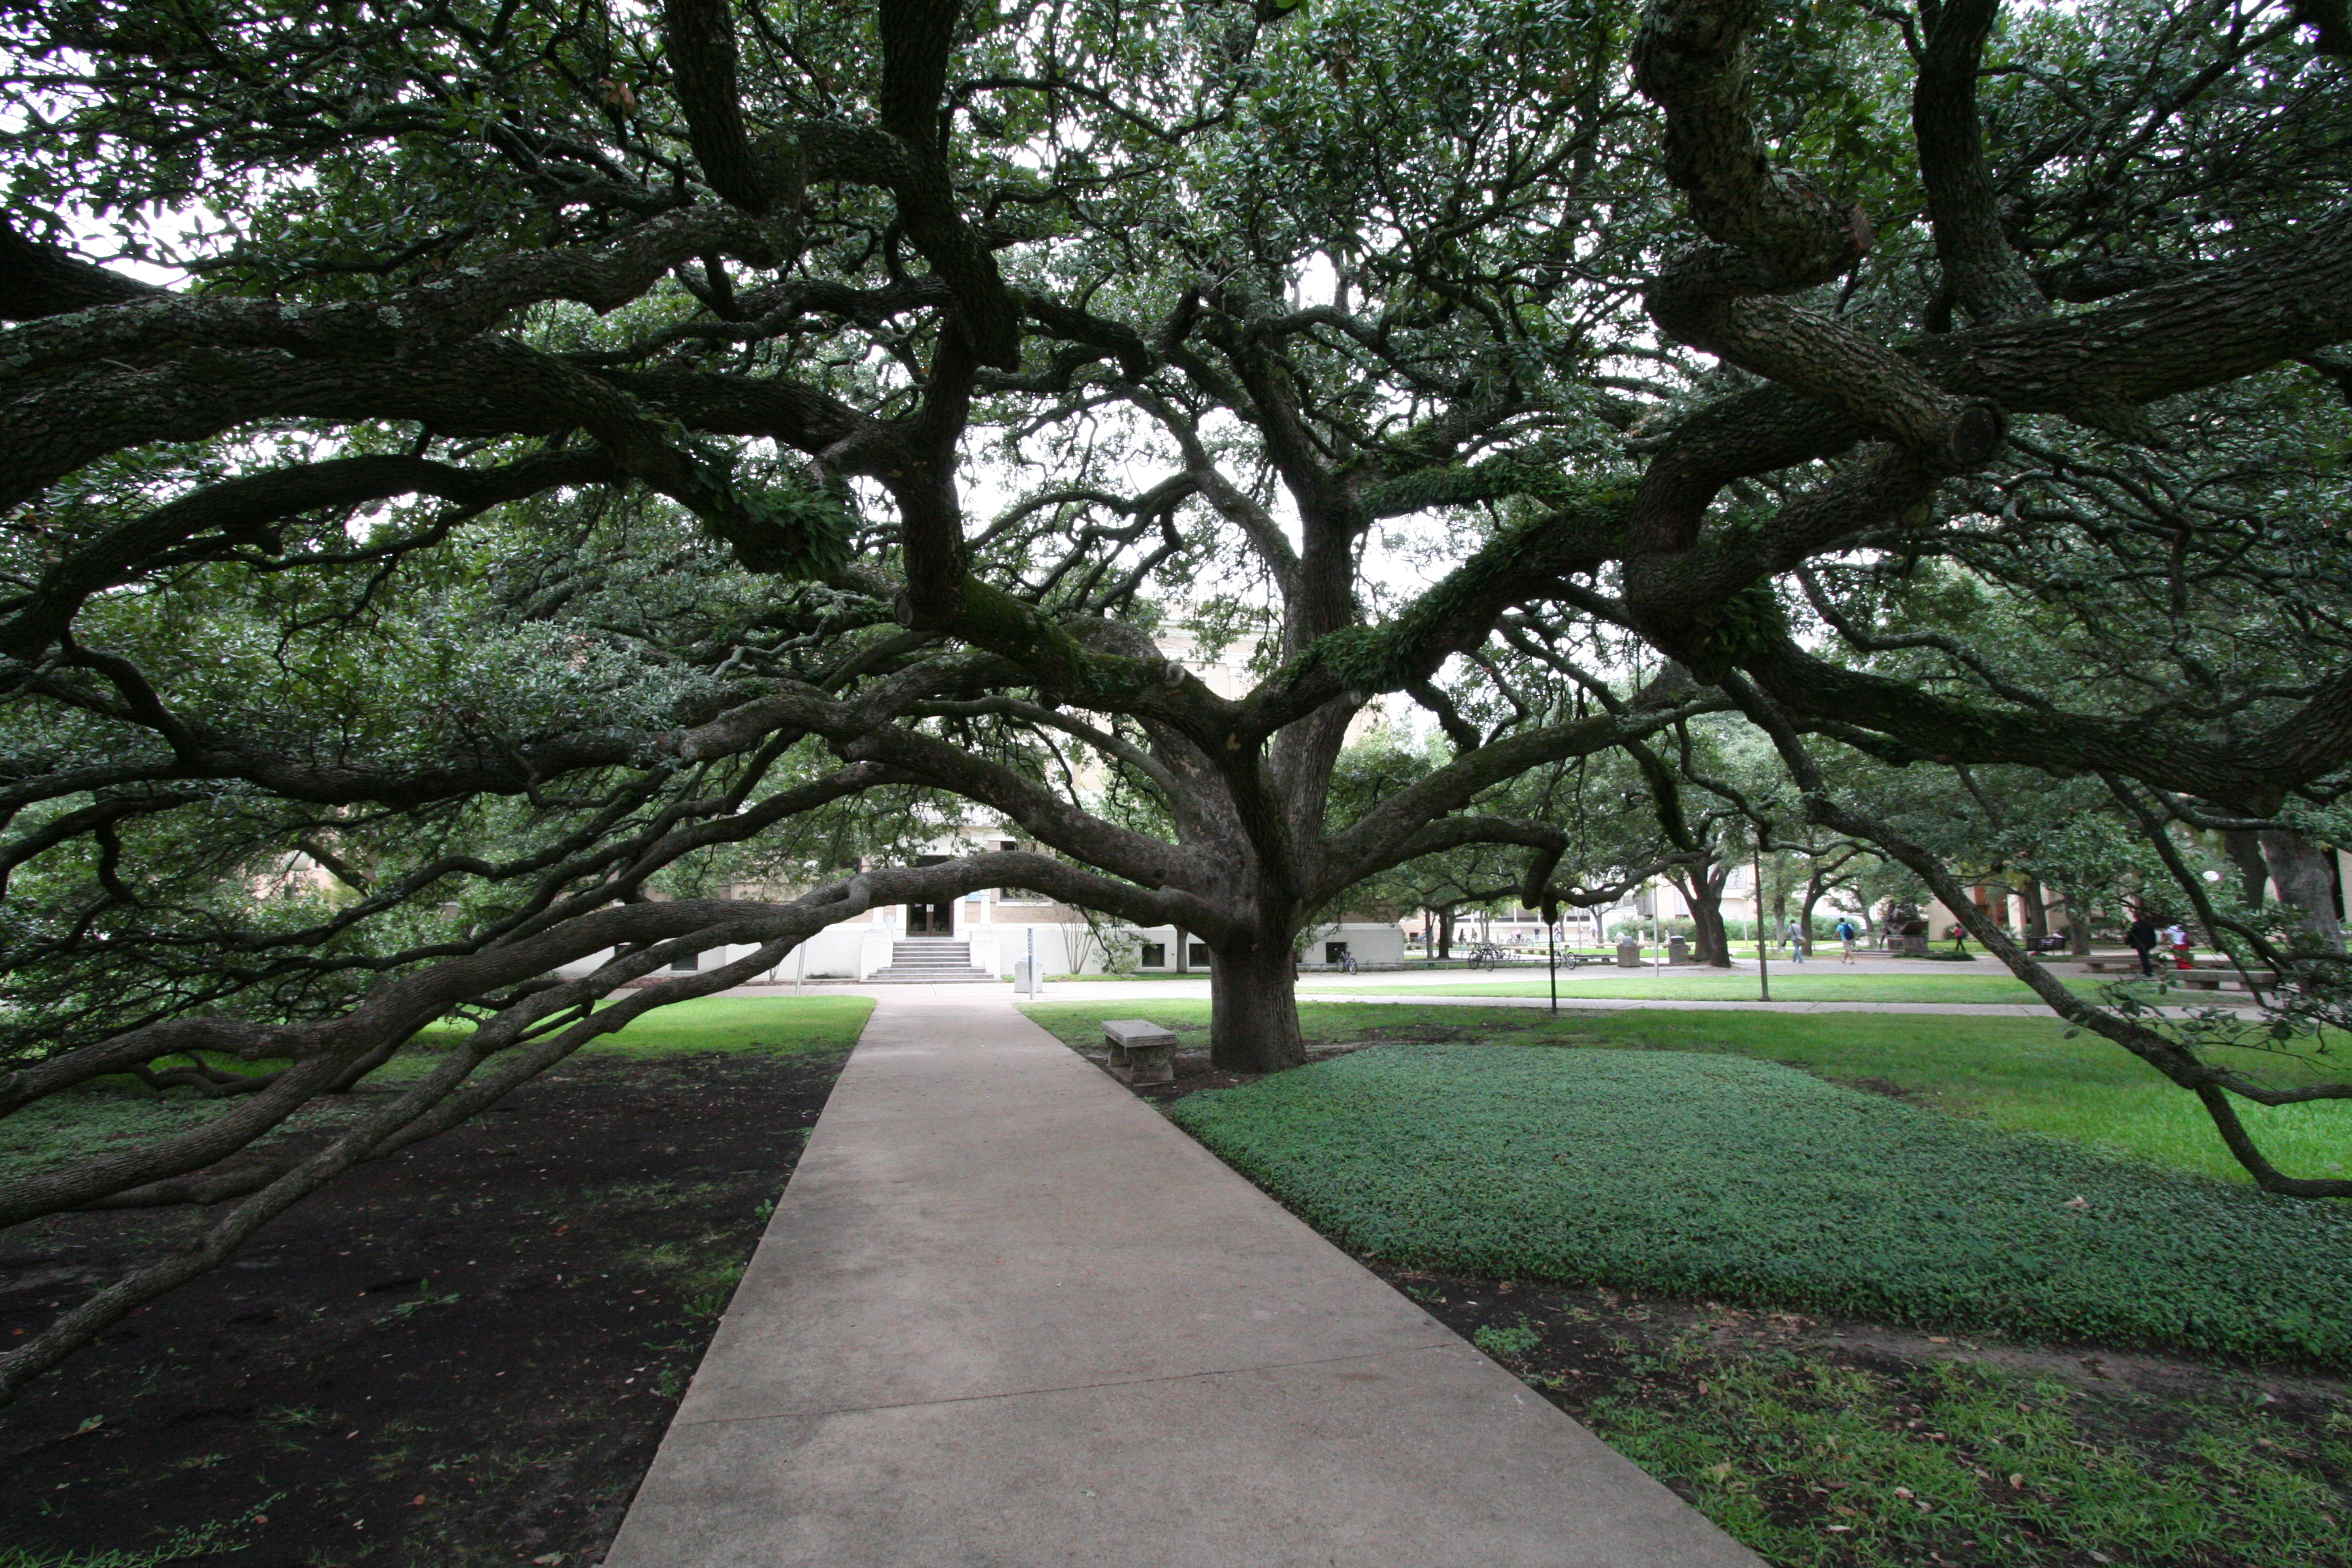 A large sprawling tree extending over a sidewalk on a college campus